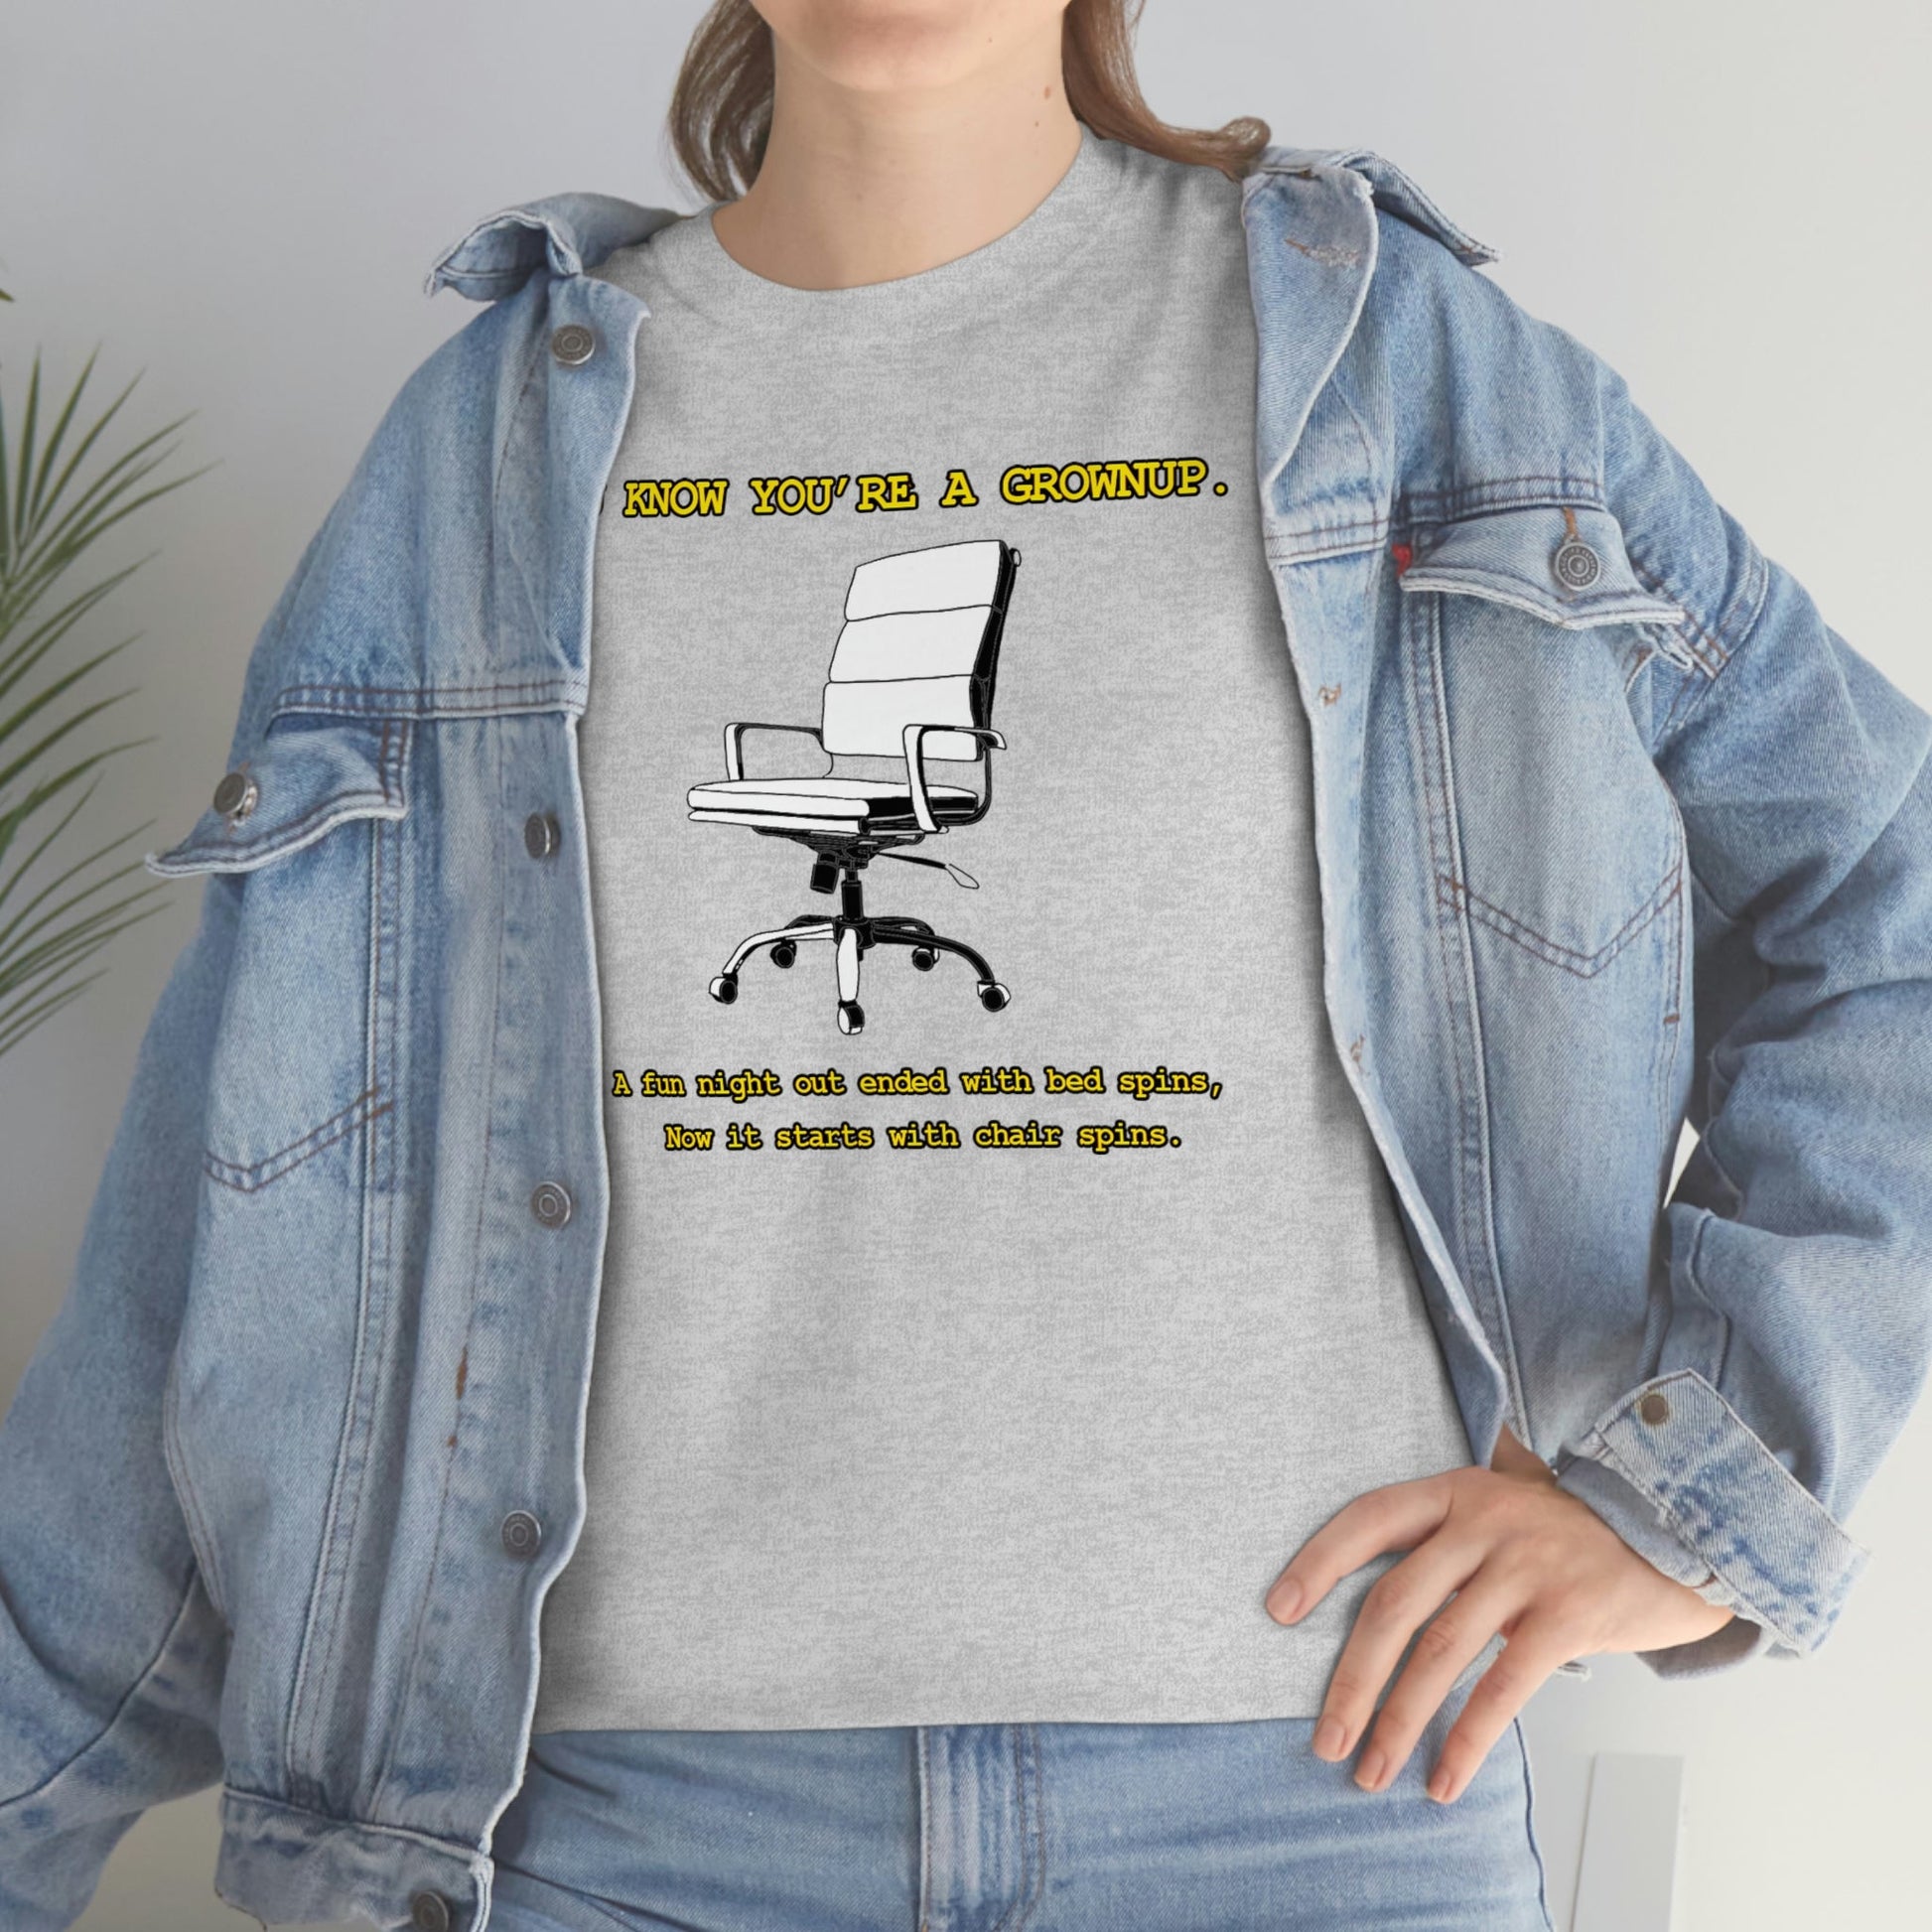 You Know You're A Grownup Unisex Heavy Cotton Tee Bedspins Office Humor Work Prank Bed Spins Joke fun funny Present Gift